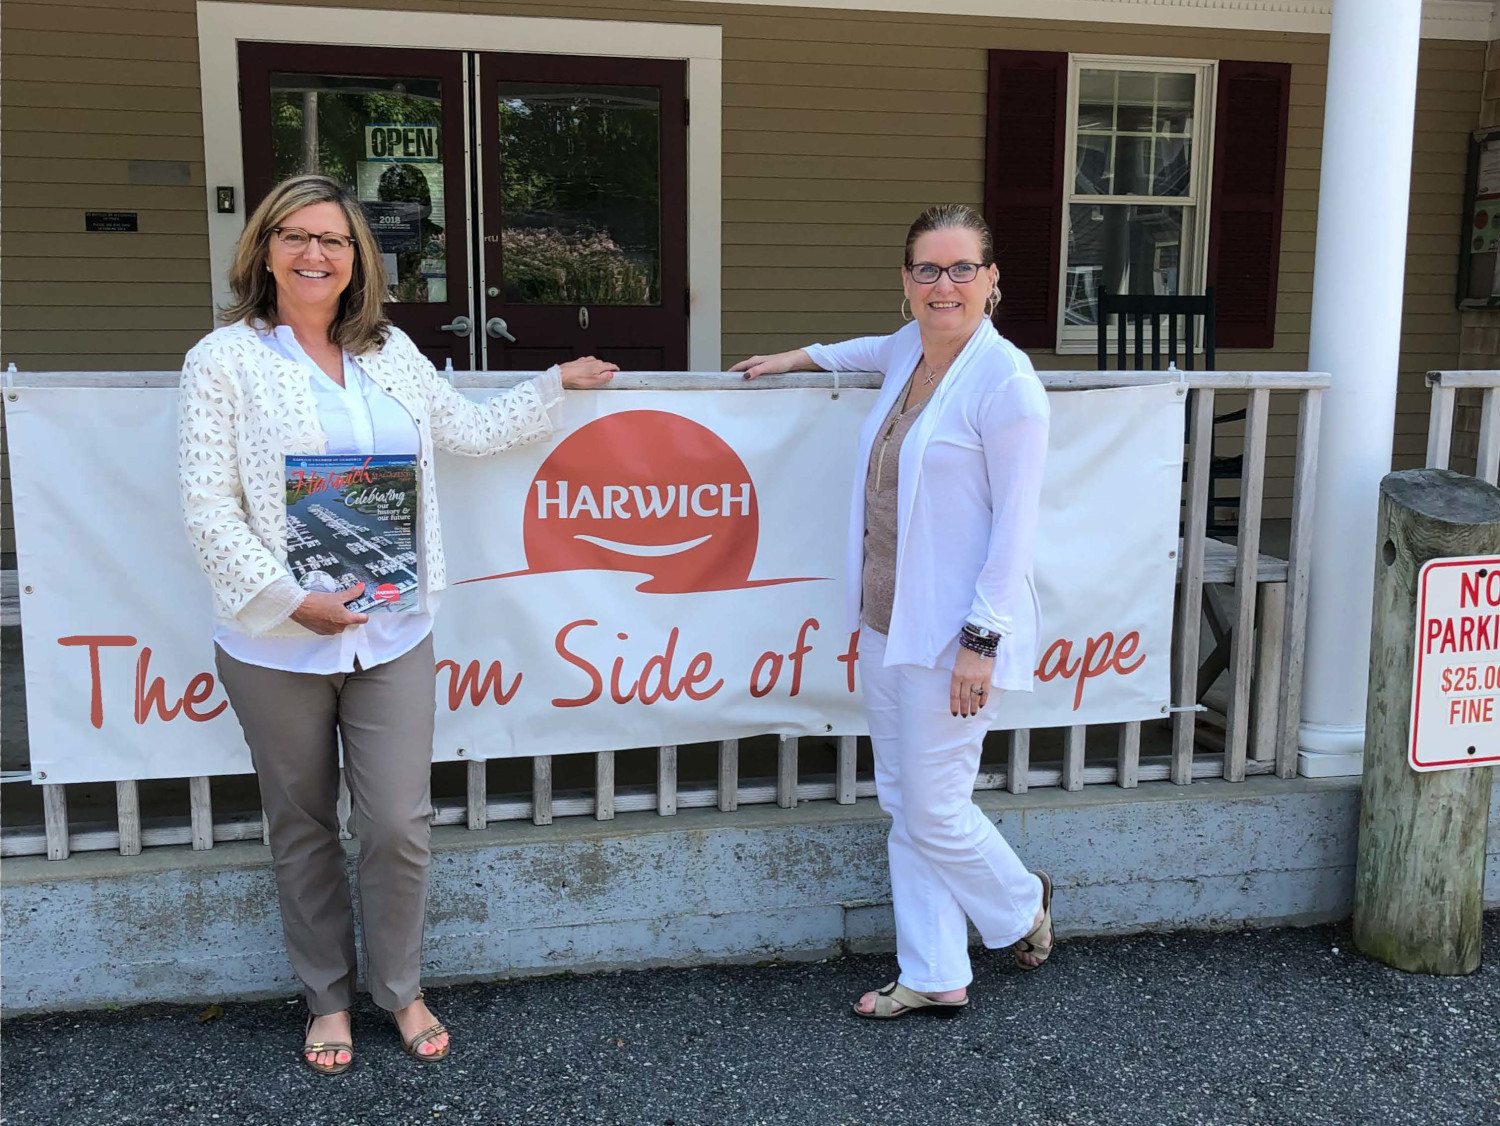  Harwich Chamber office and executive director